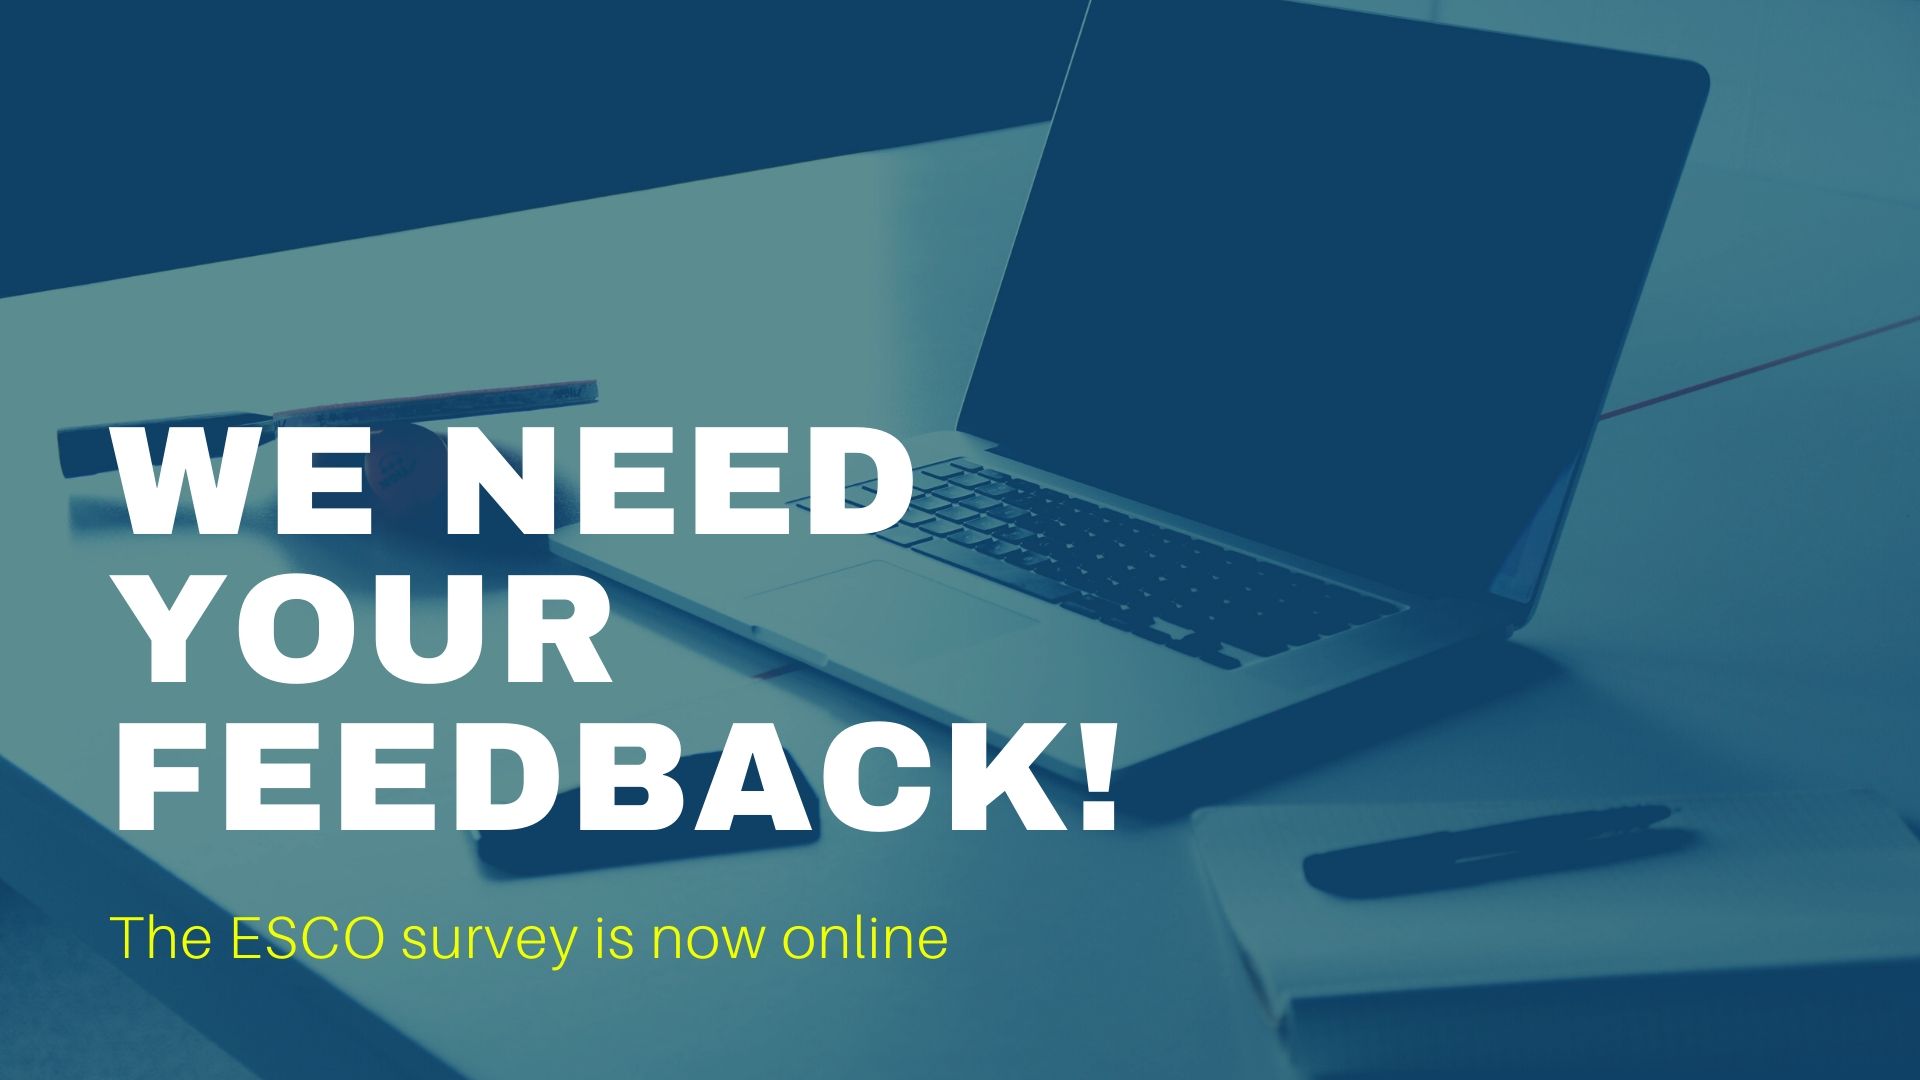 Image showing laptop icon and text: we need your feedback, the esco survey is now online